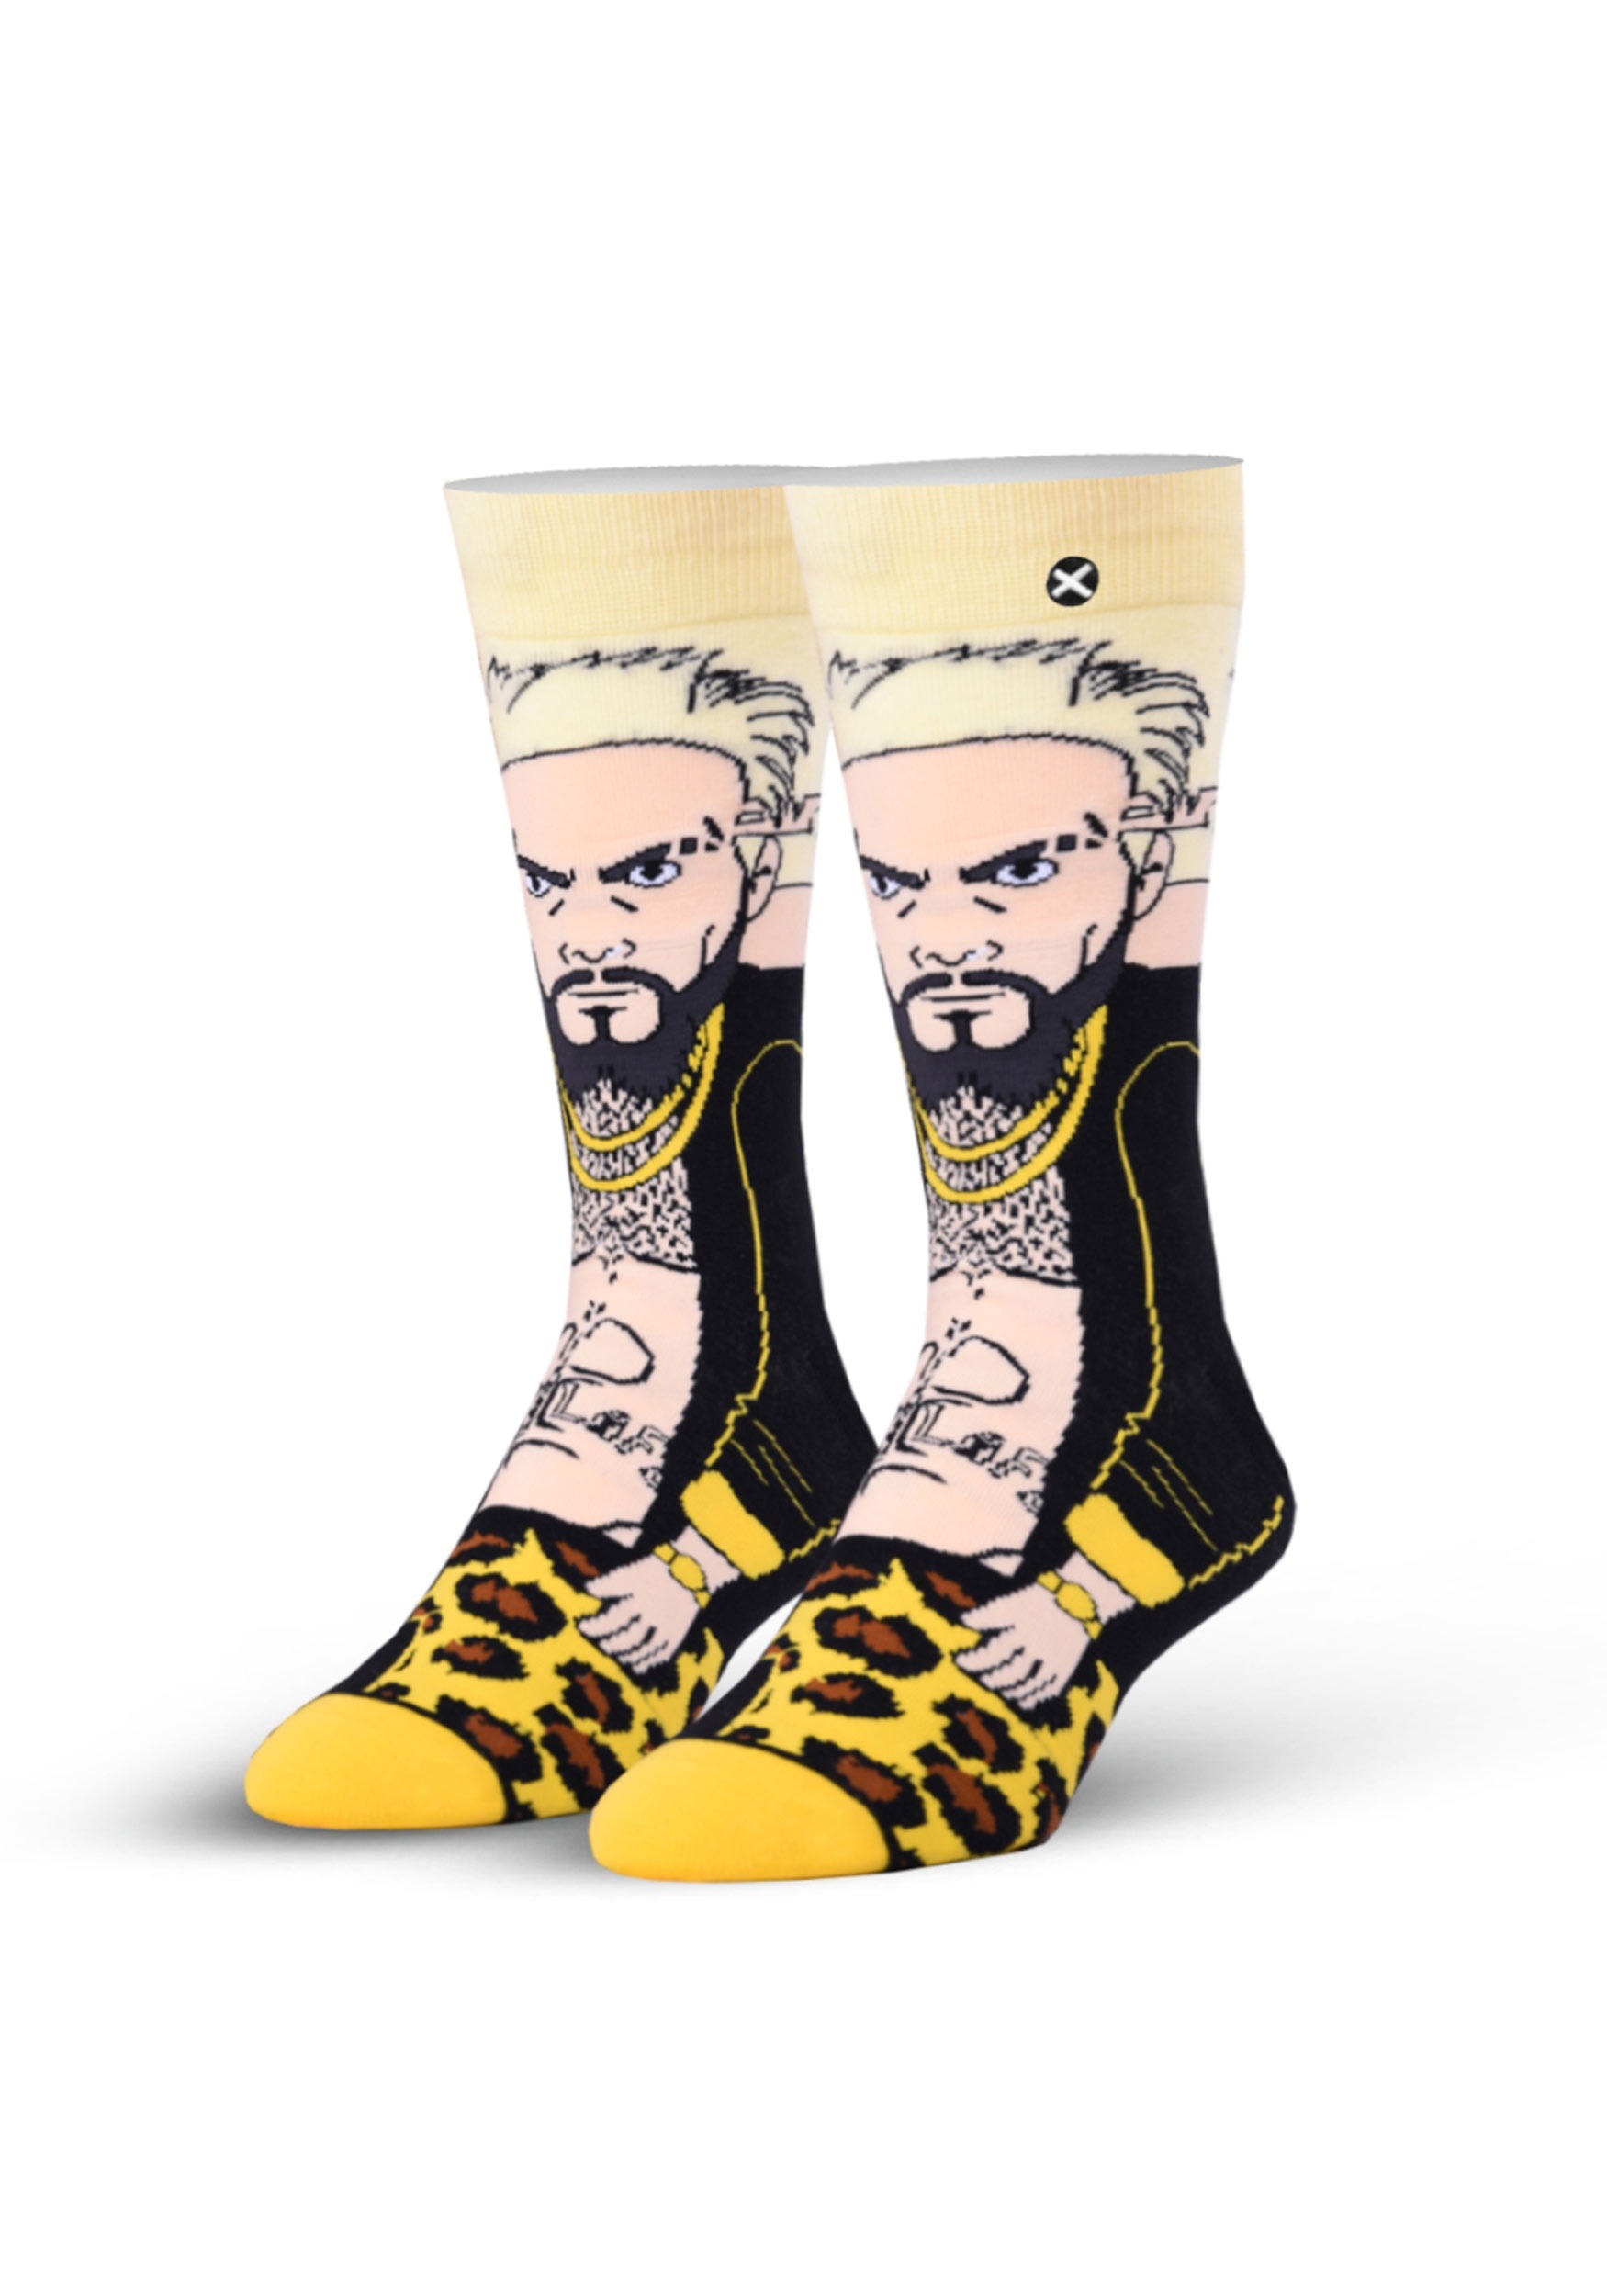 Adult Enzo Amore WWE 360 Knit Socks from Odd Sox